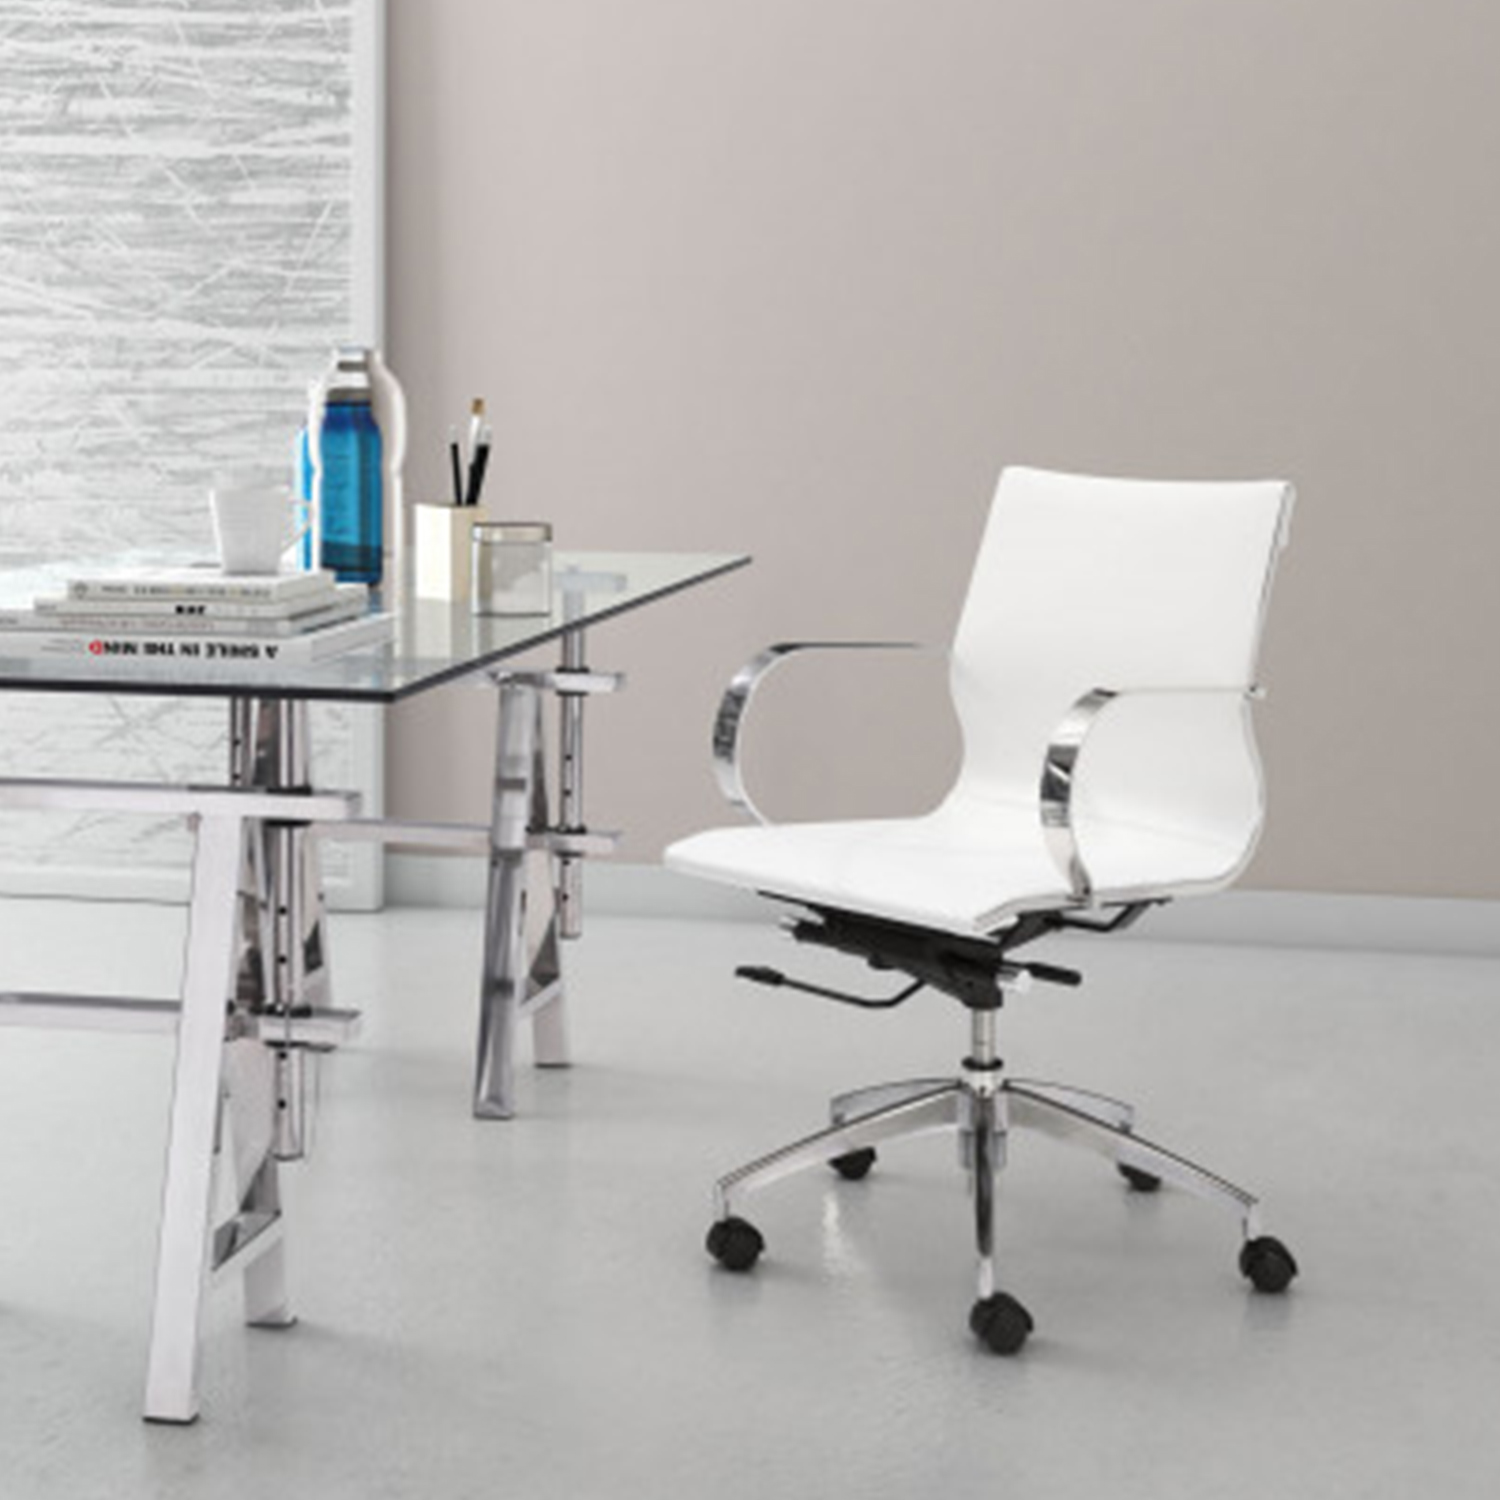 27.6" X 27.6" X 36" White Leatherette Low Back Office Chair